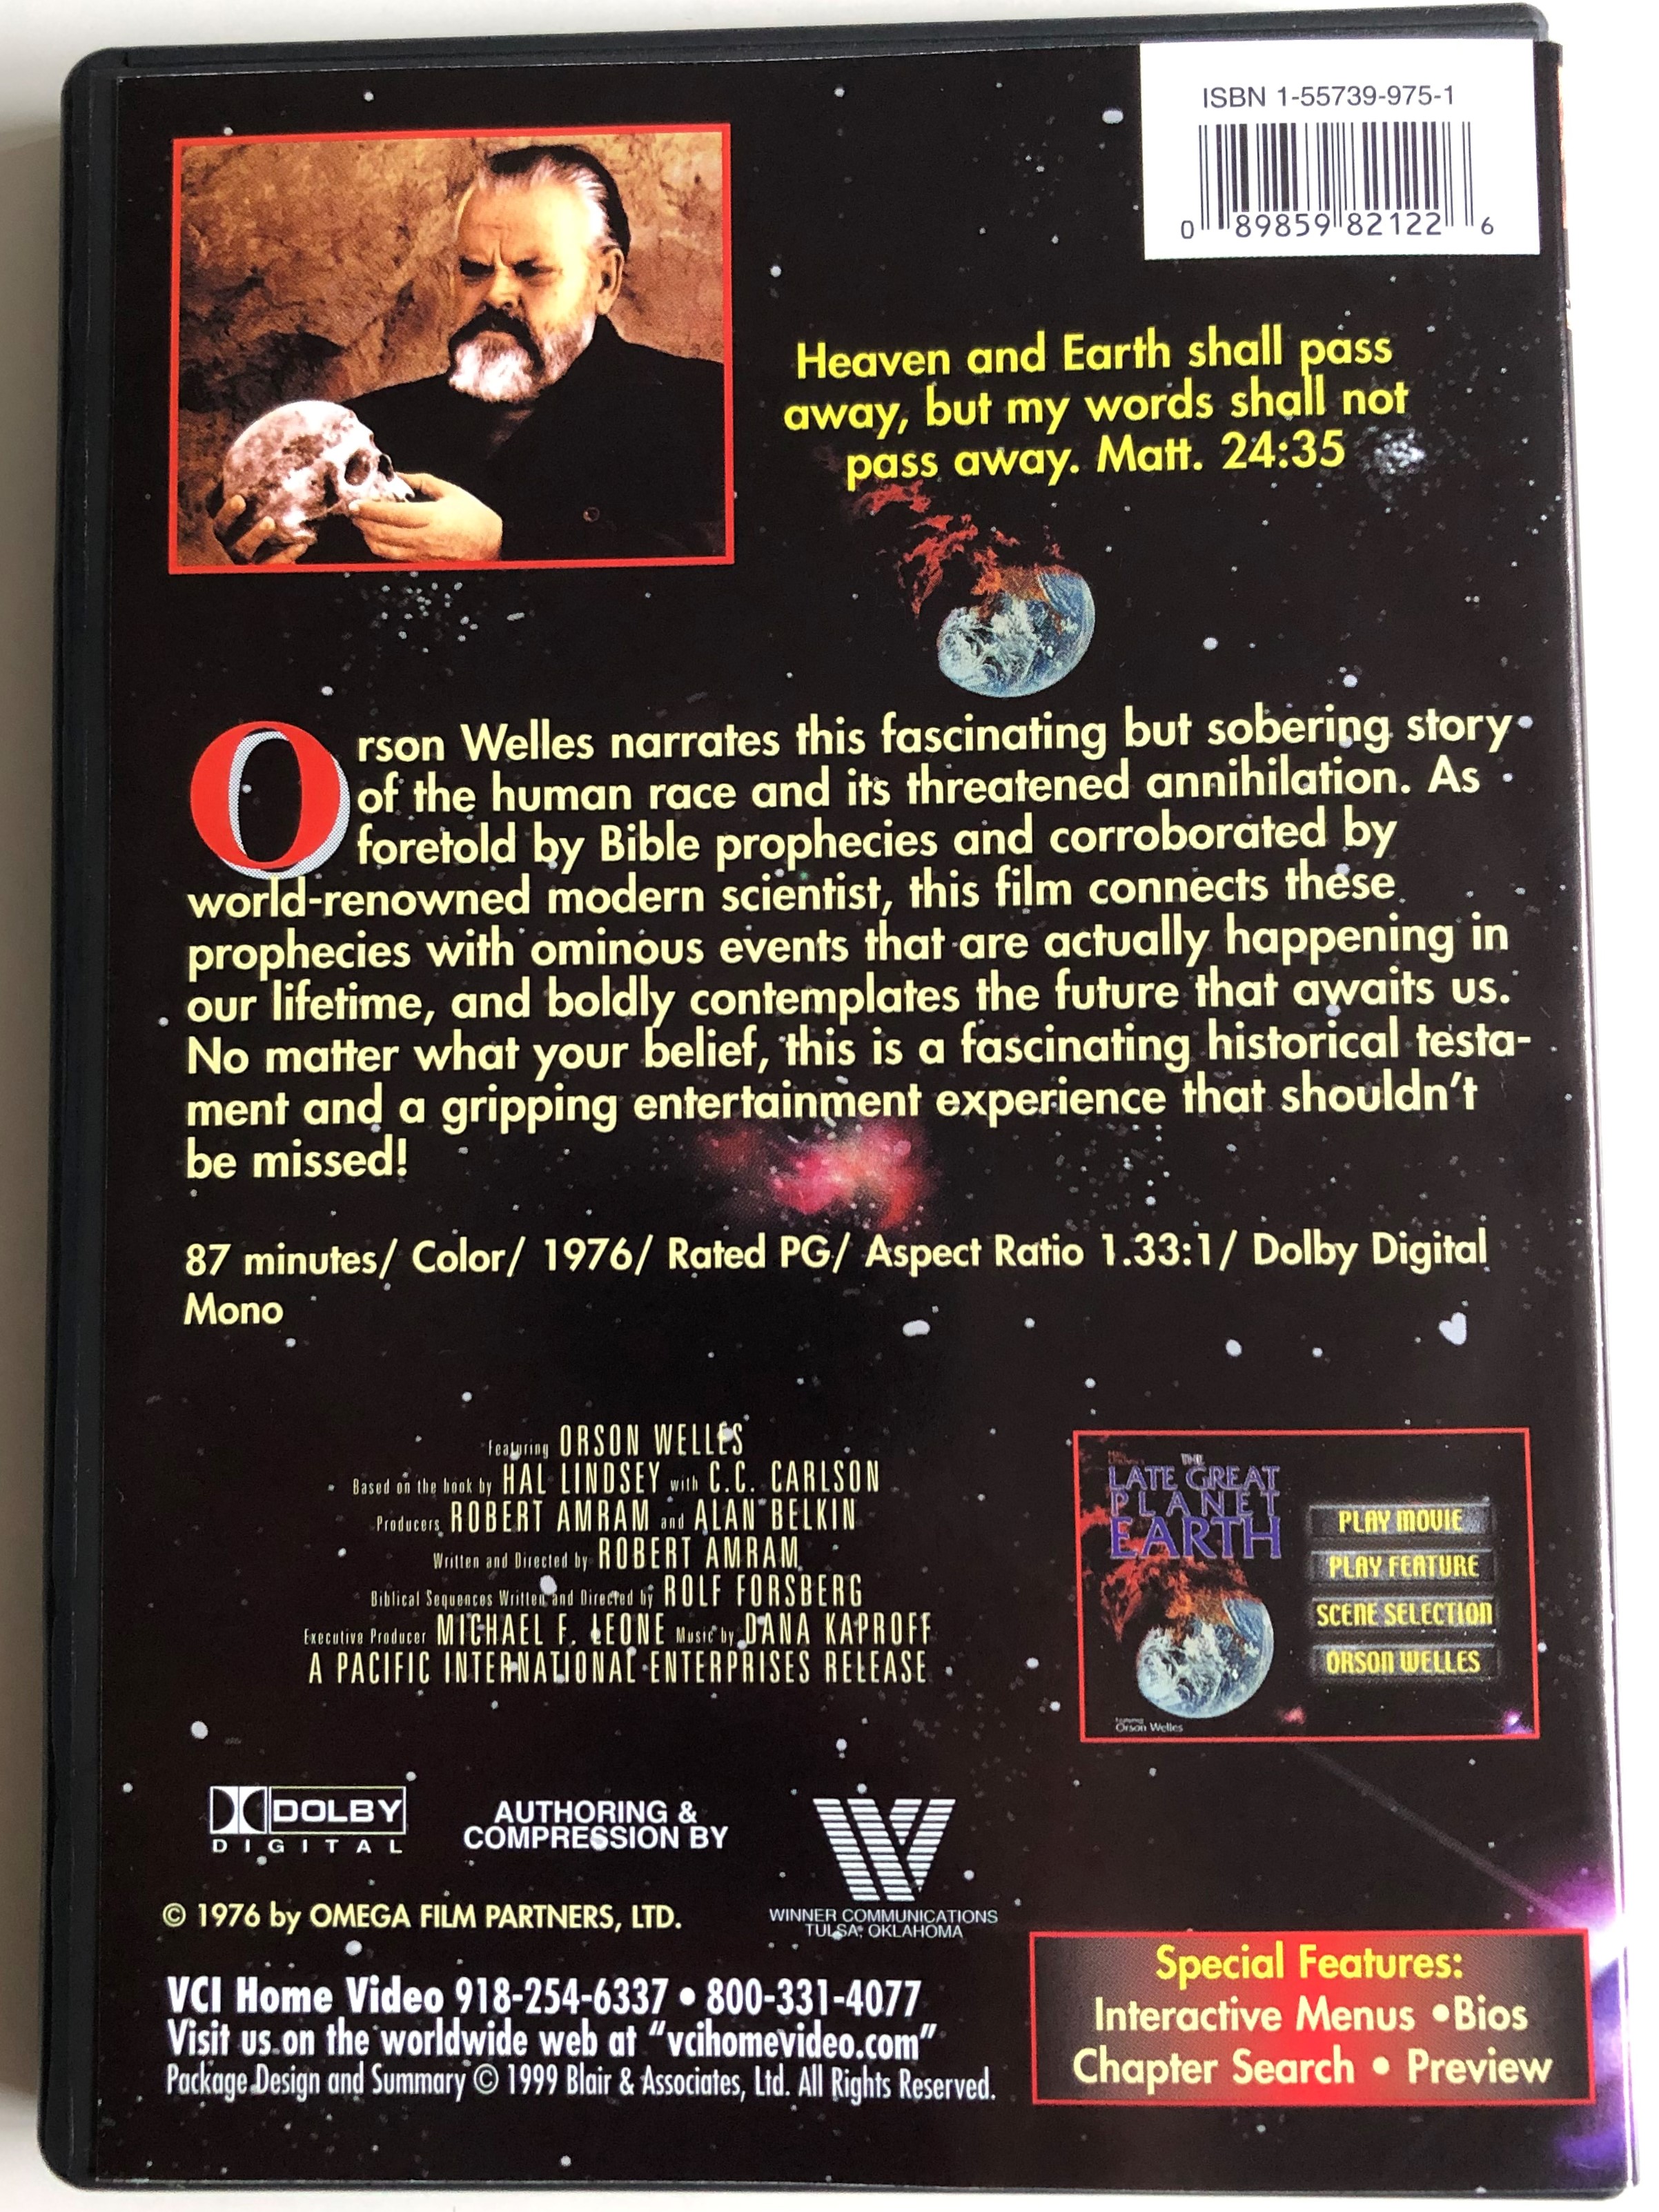 The Late Great Planet Earth DVD 1979 Featuring Orson Welles 1.JPG